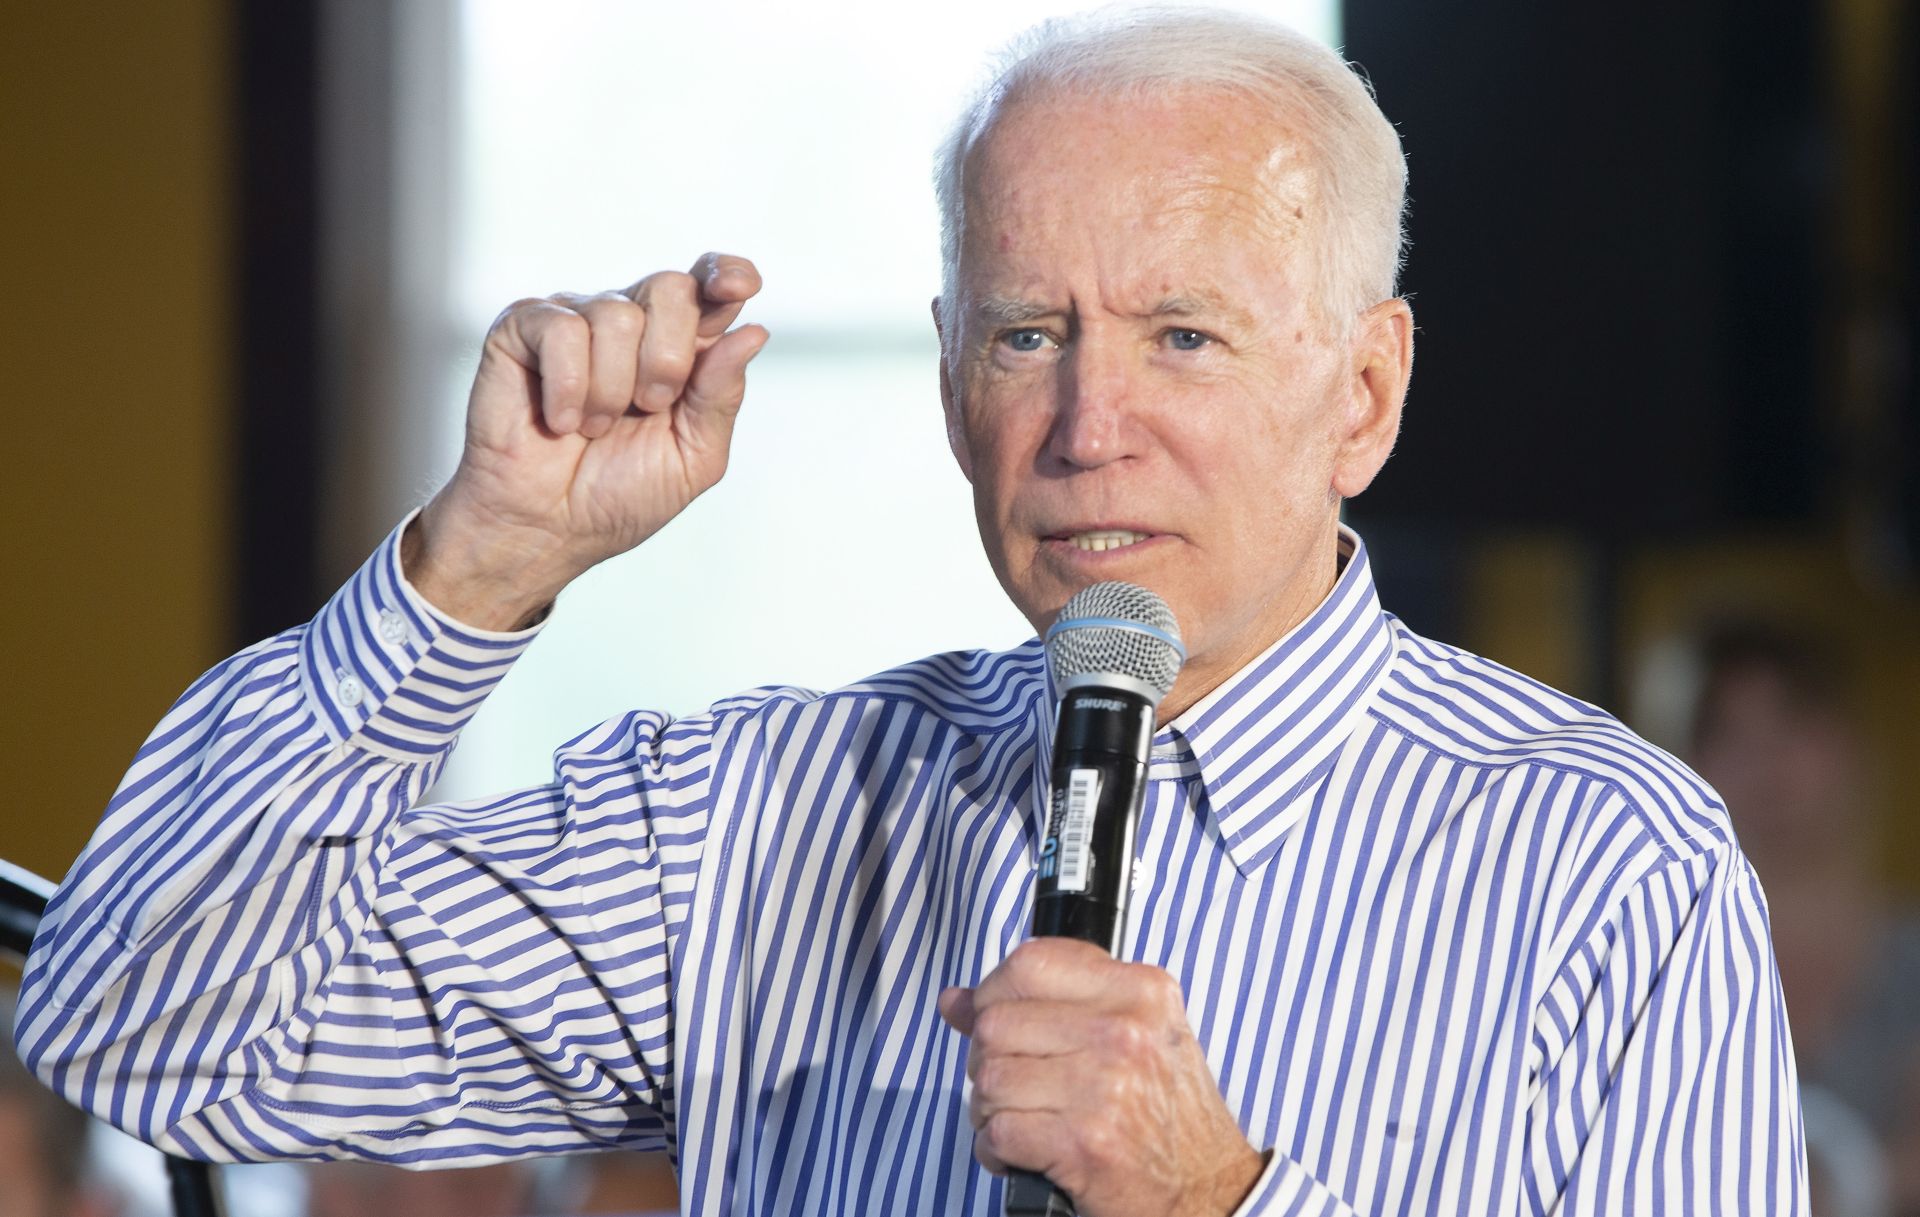 epa07625770 Democratic candidate for United States President, Former Vice President Joe Biden, addresses voters at the Berlin Town Hall in Berlin, New Hampshire, USA 04 June 2019. Biden is on a multi-stop tour of New Hampshire.  EPA/CJ GUNTHER